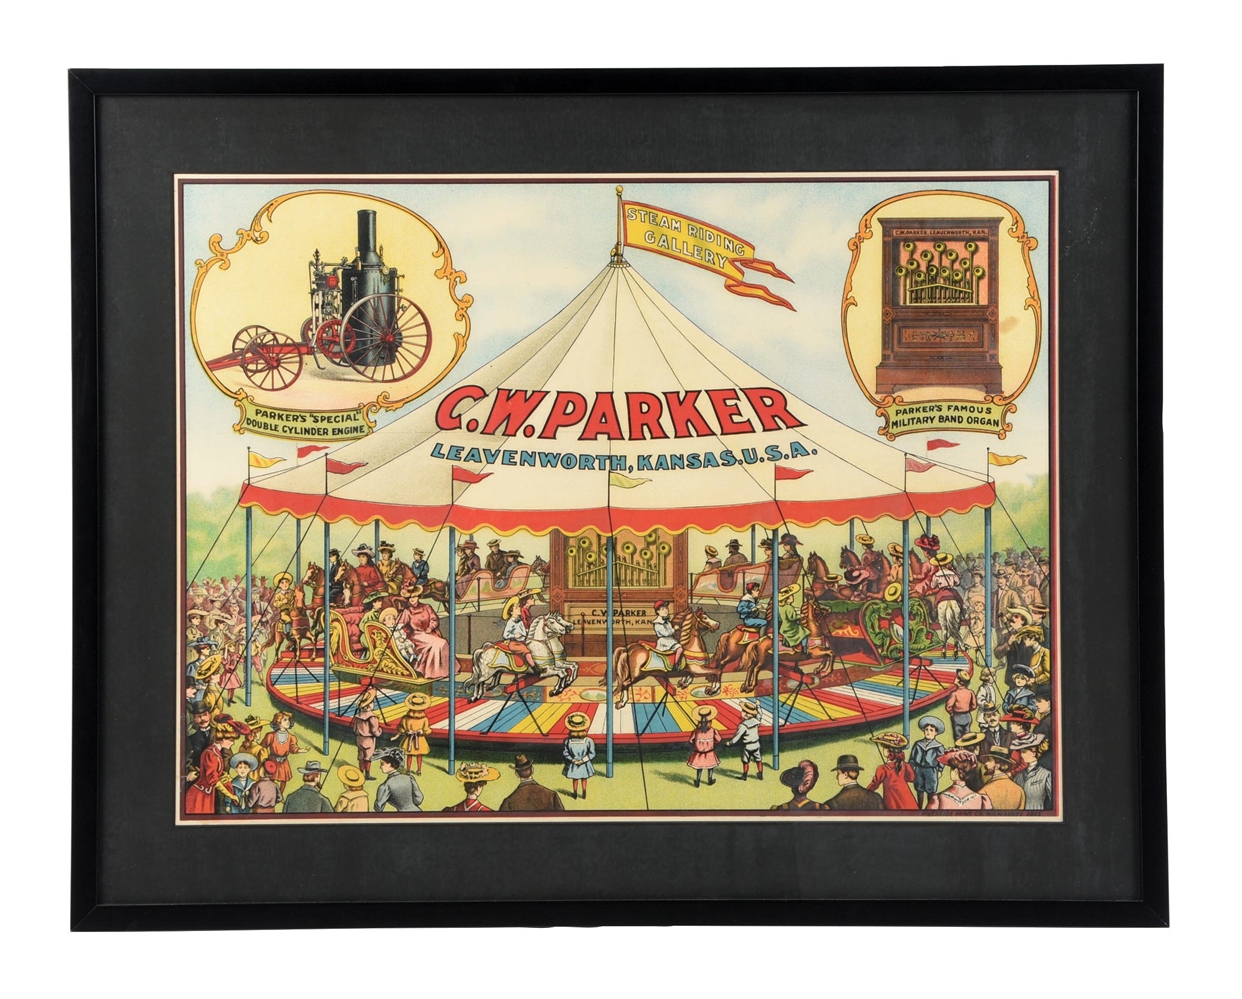 C. W. PARKER PAPER LITHOGRAPH POSTER W/ CAROUSEL GRAPHIC